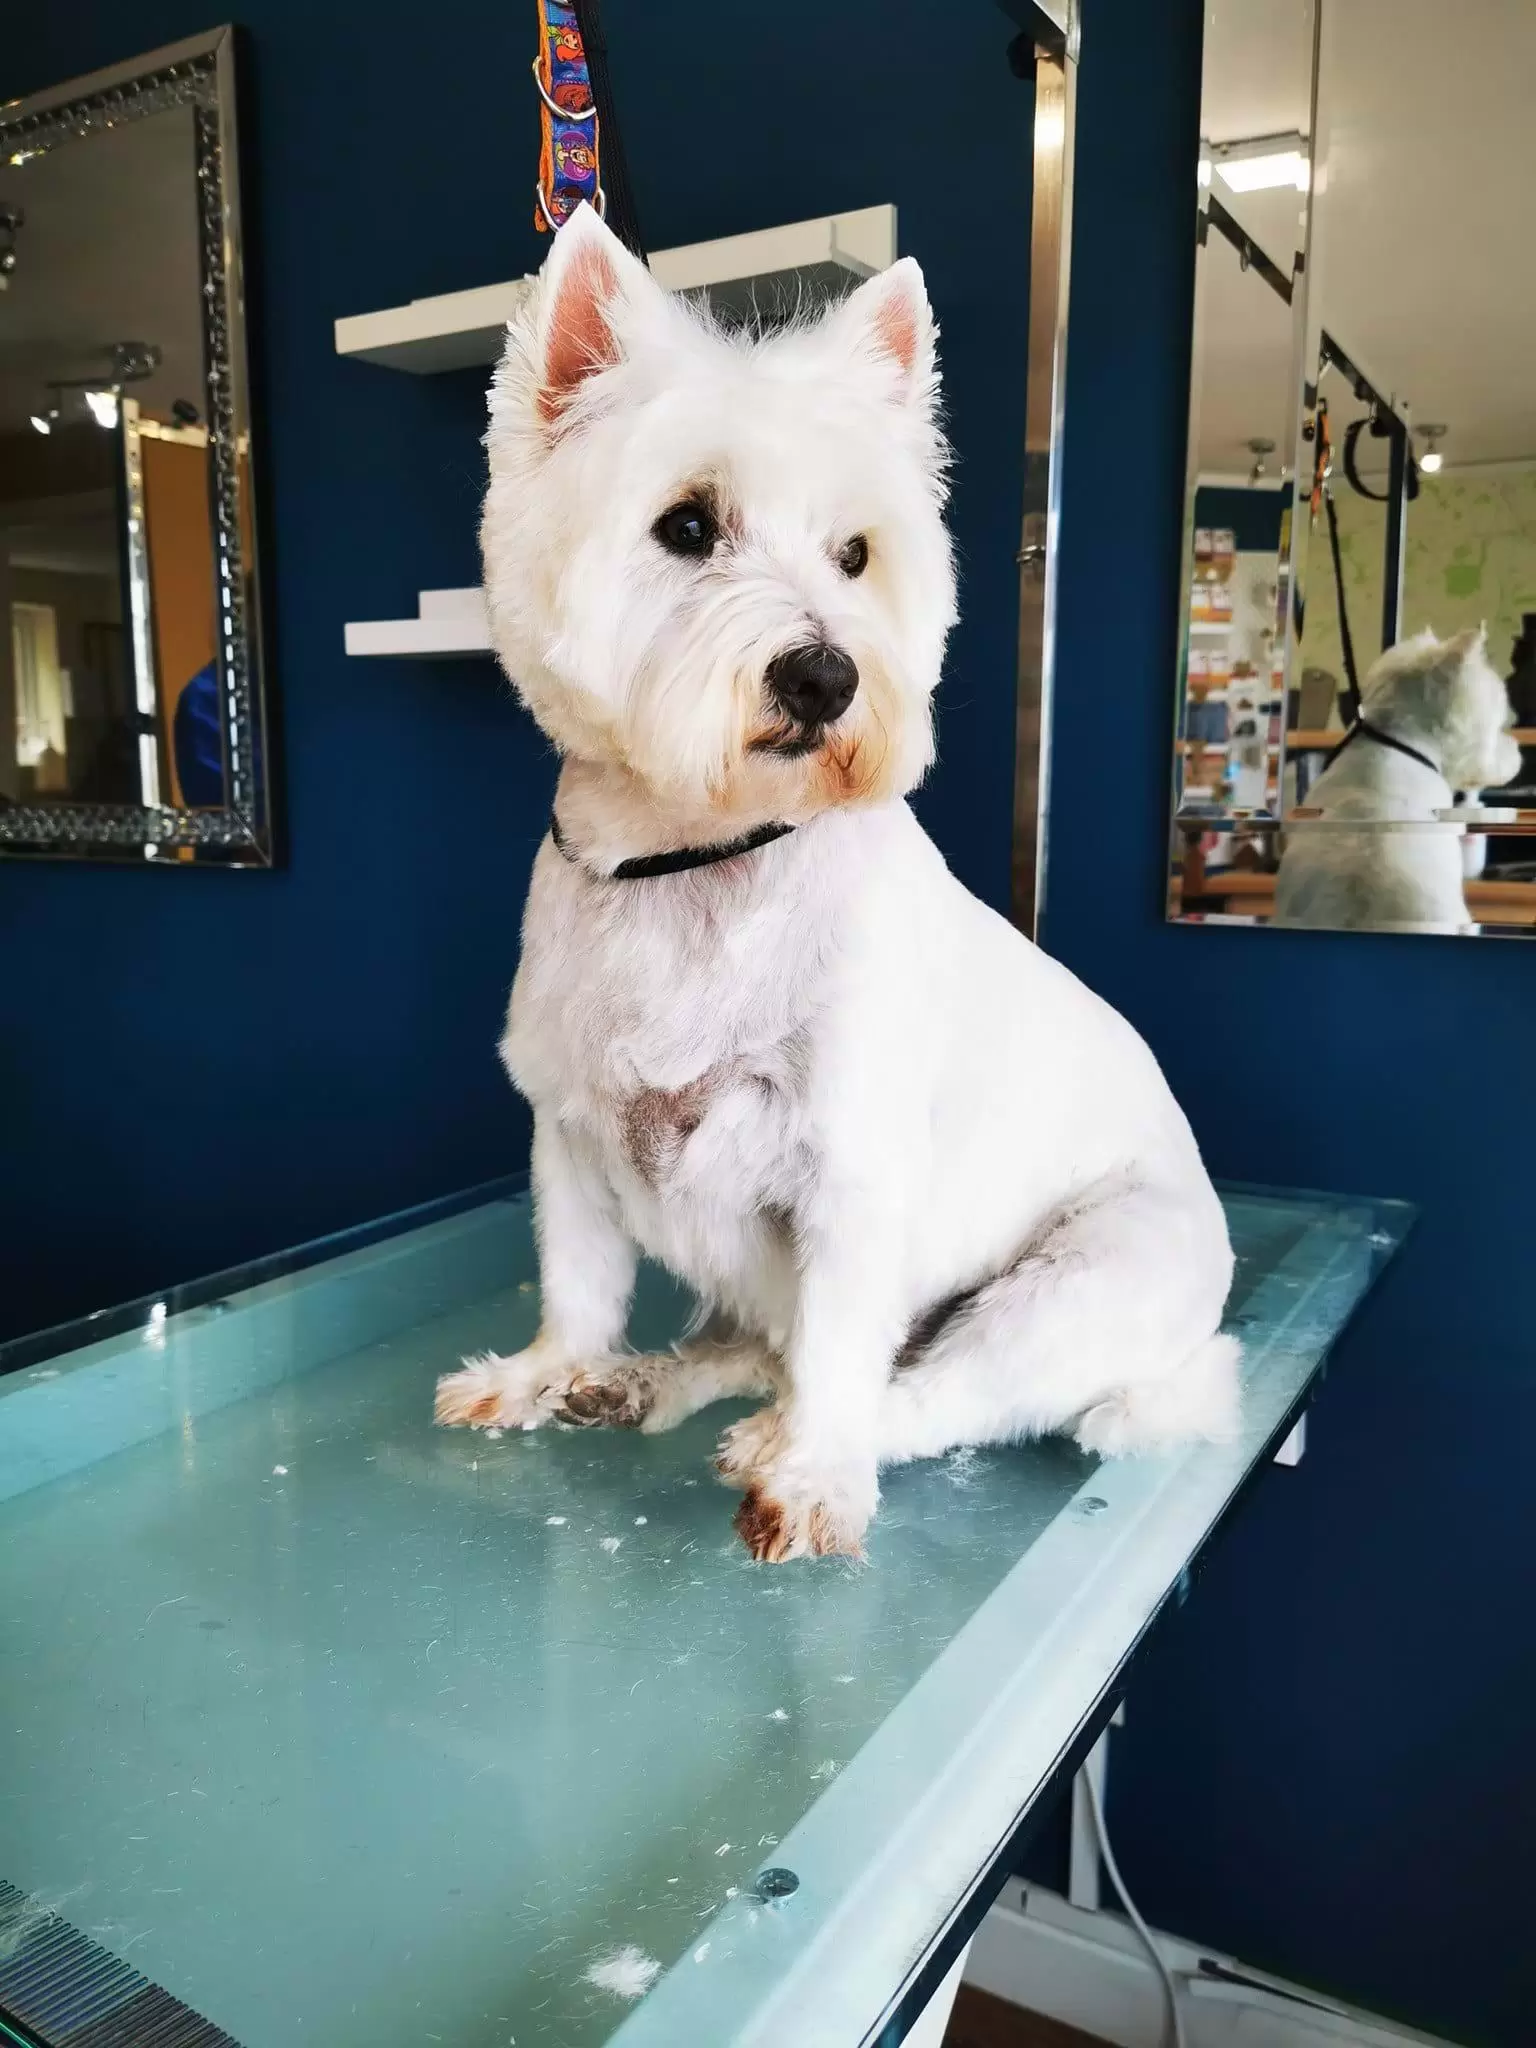 Small White Dog sitting on the grooming table, looking at the window